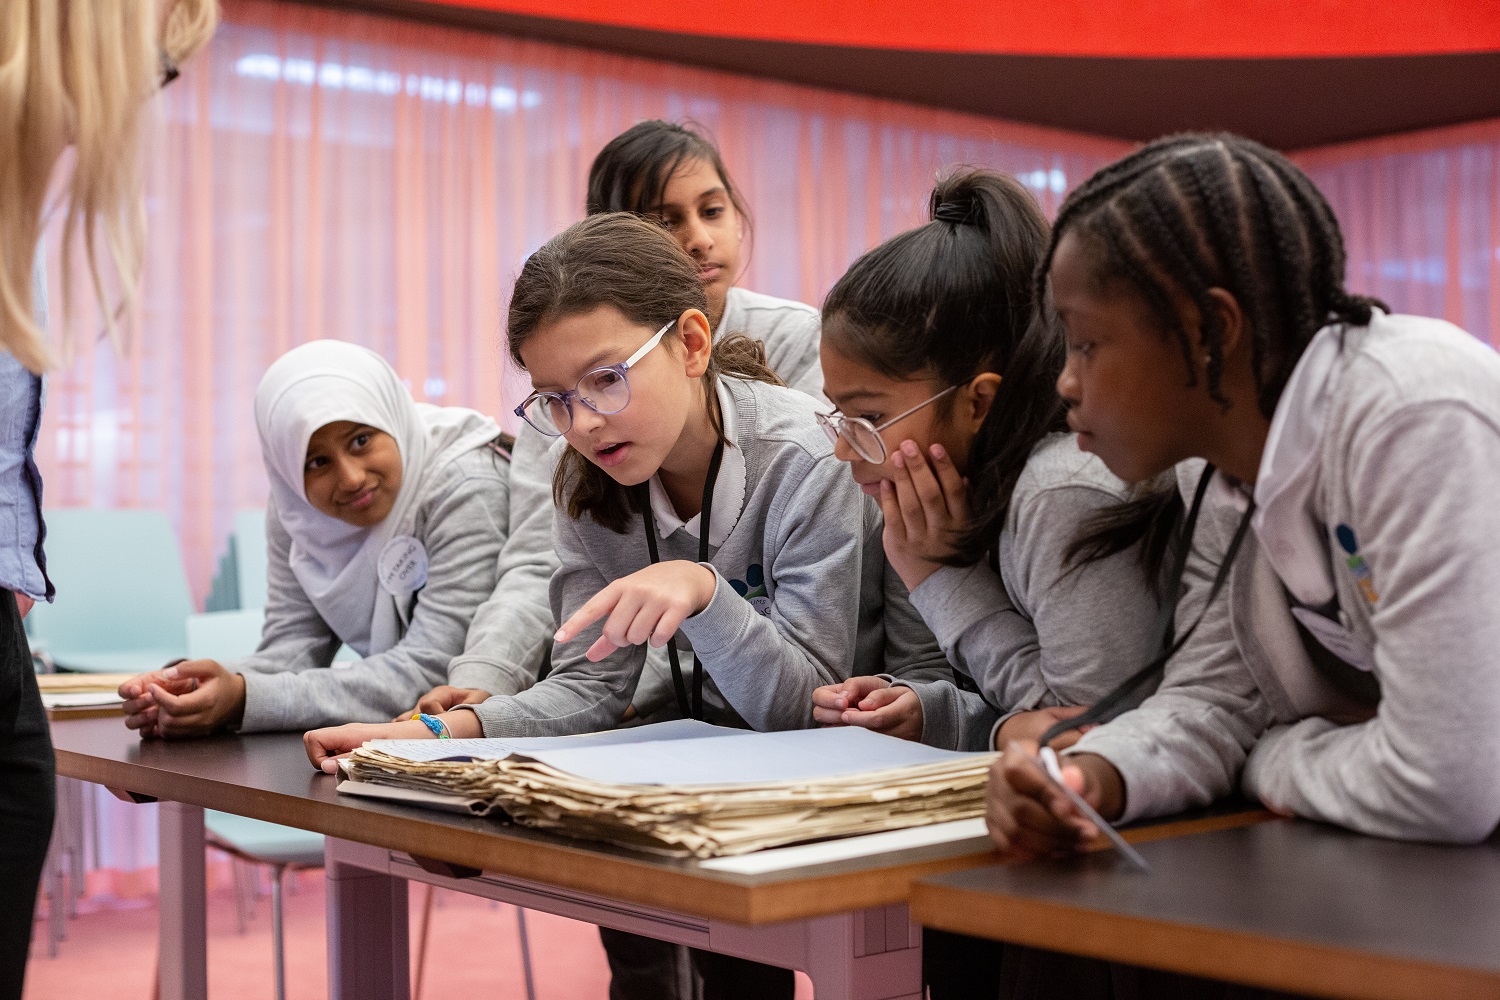 Five pupils gather round and examine a large historic book at the National archives.